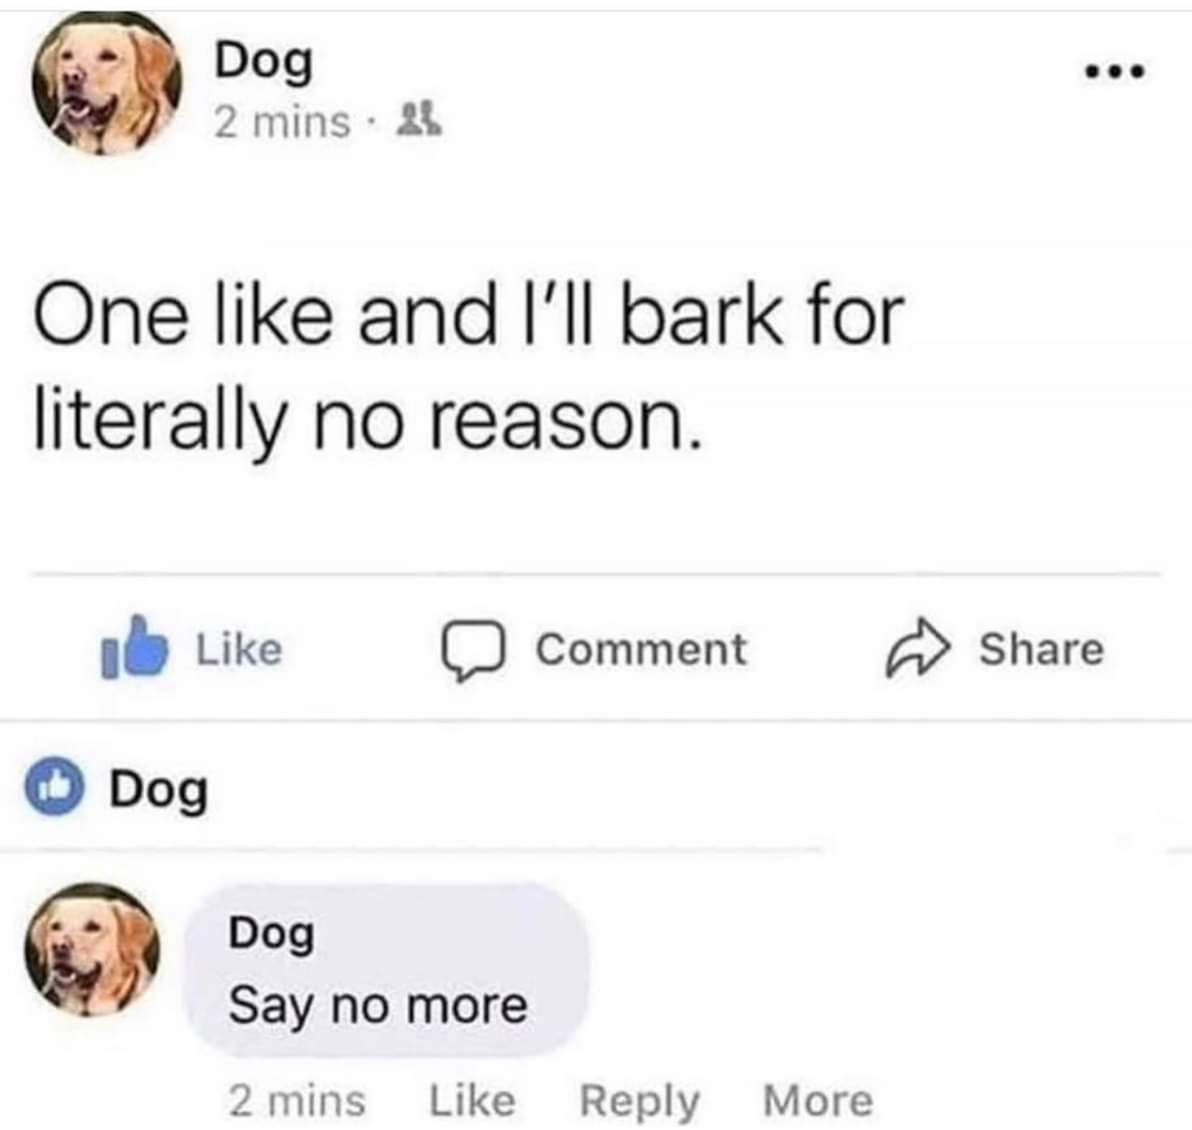 one like and ill - Dog 2 mins. 2 One and I'll bark for literally no reason. Ib Comment Dog Dog Say no more 2 mins More